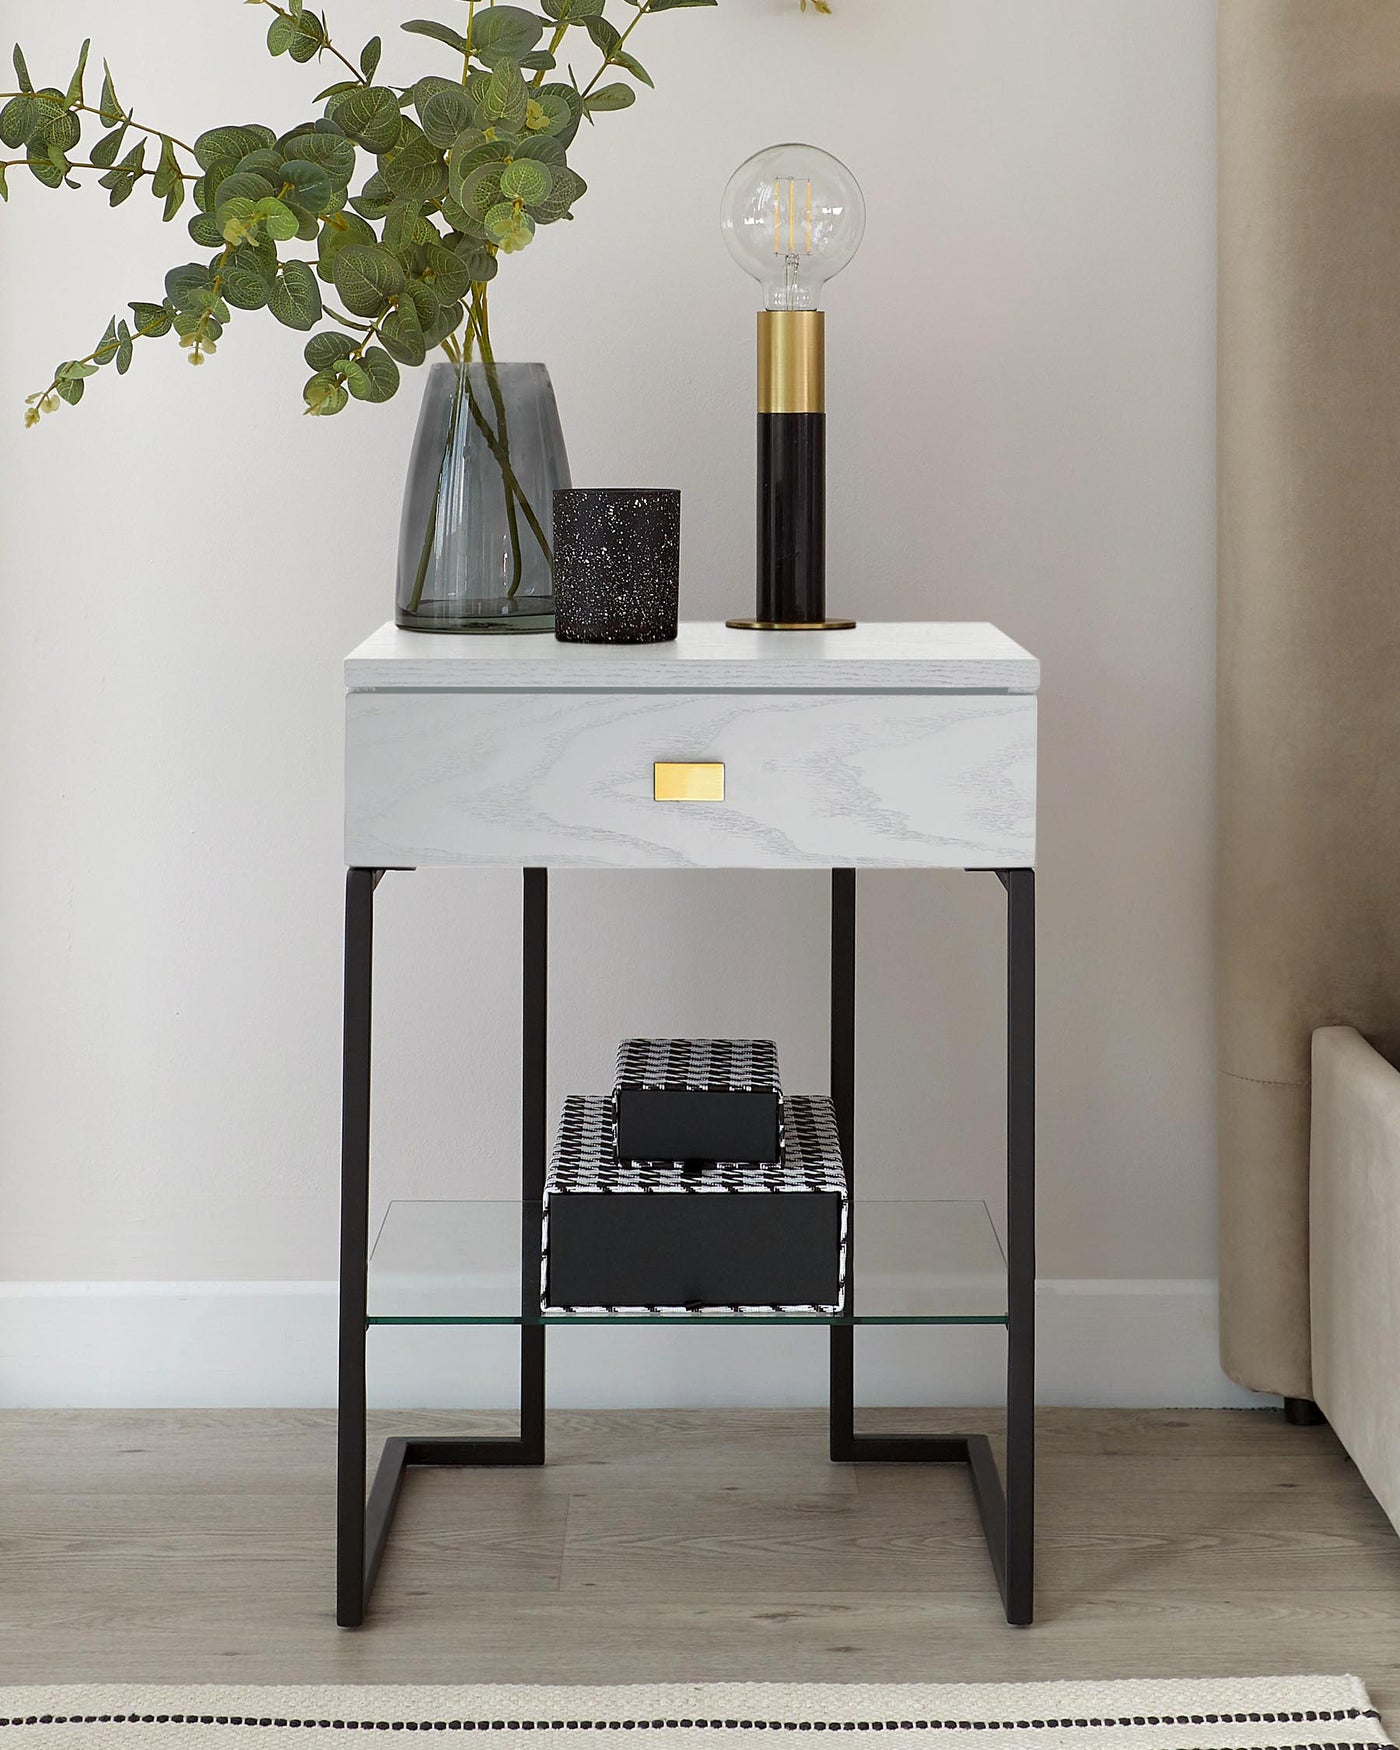 Modern marble-top side table with a sleek, minimalist design featuring a white and grey marbled surface, a single drawer with a gold accent handle, and a matte black metal frame. The table includes a lower shelf with a glass surface, perfect for displaying decorative items.